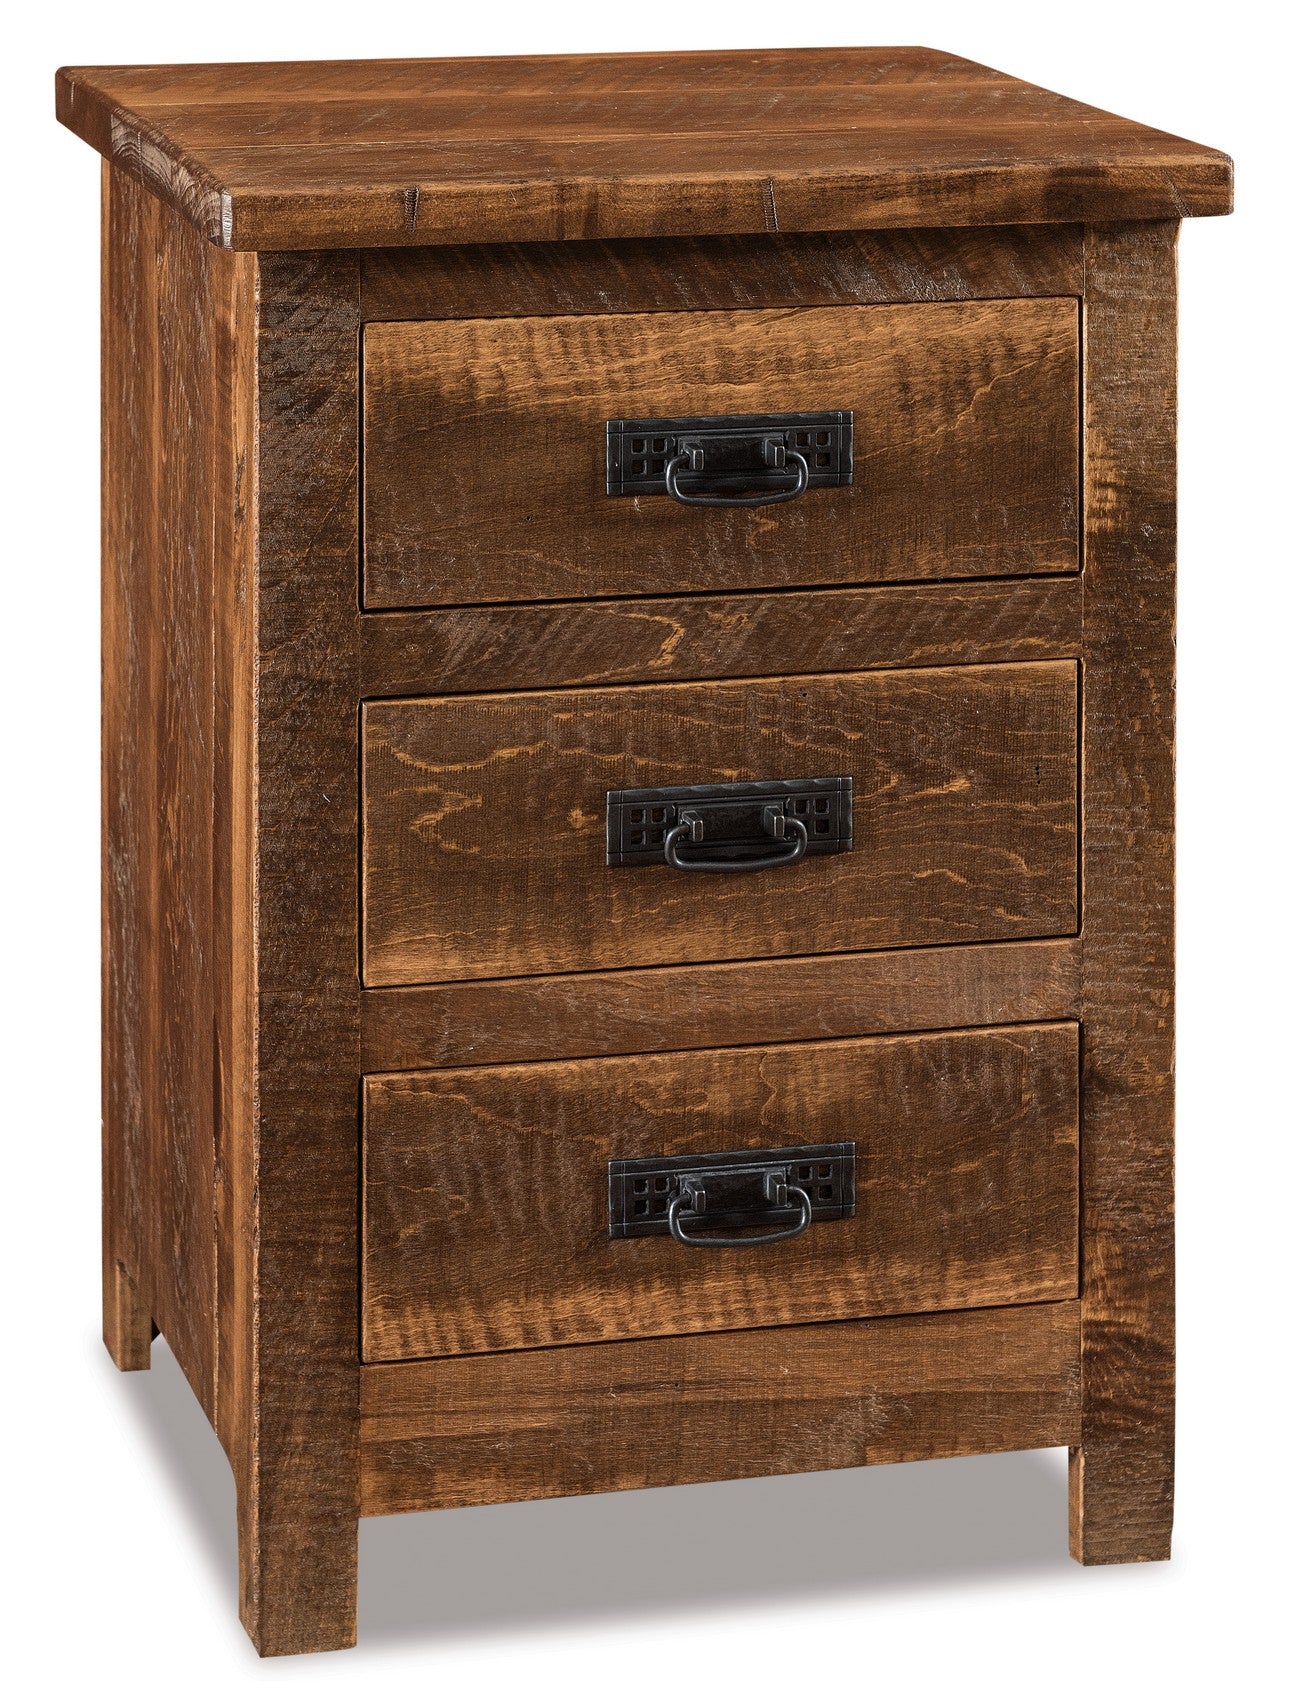 Amish Dumont Rustic Small Nightstands